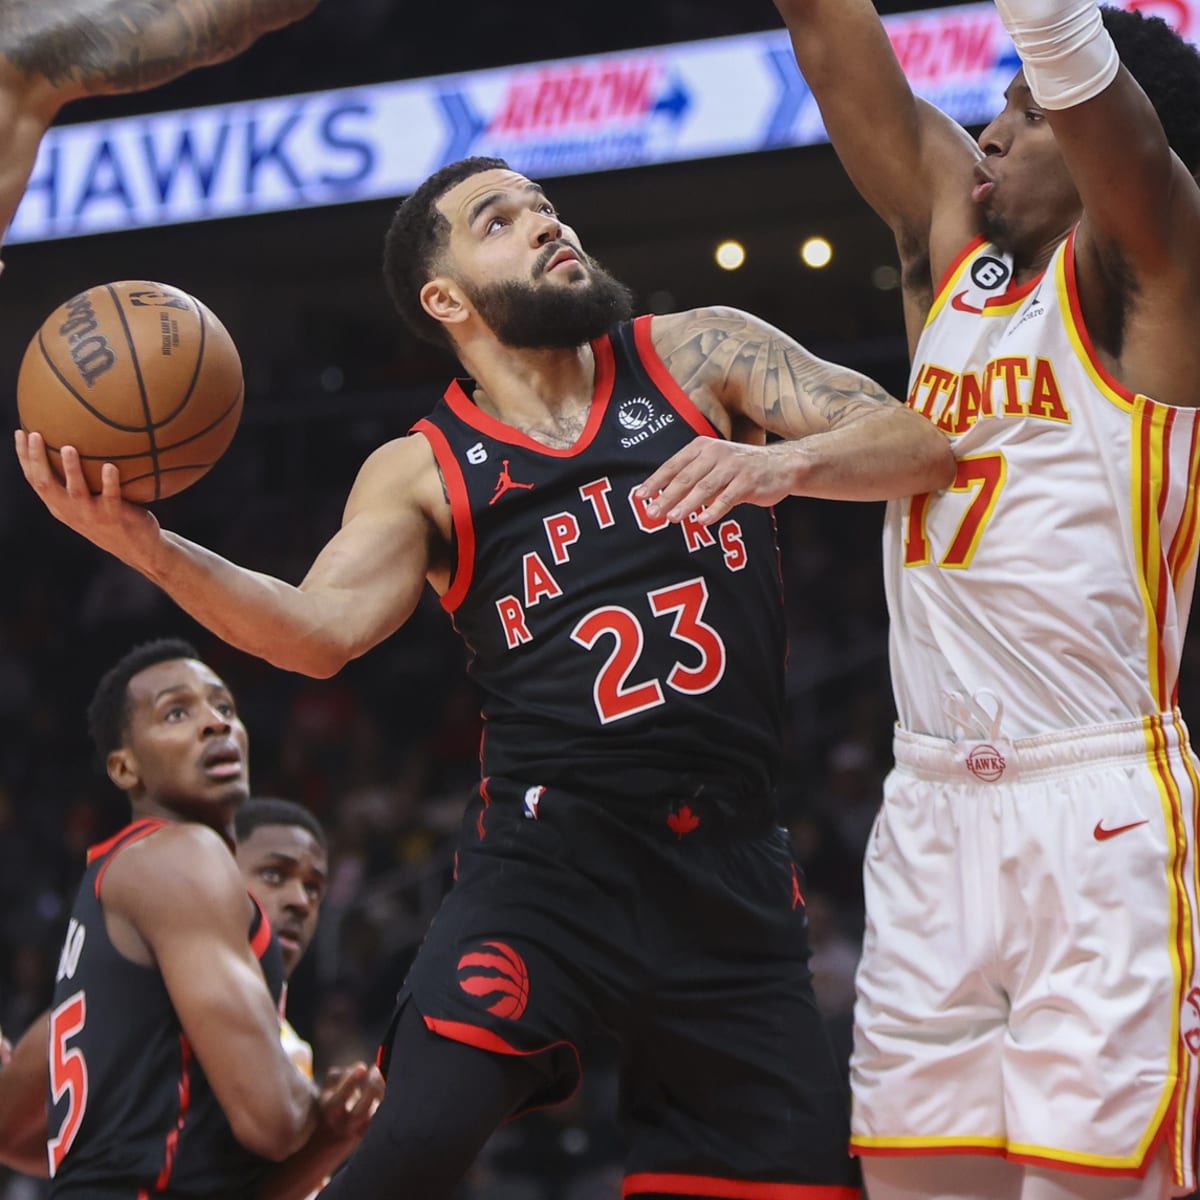 Raptors depth will be tested against Hawks with six players